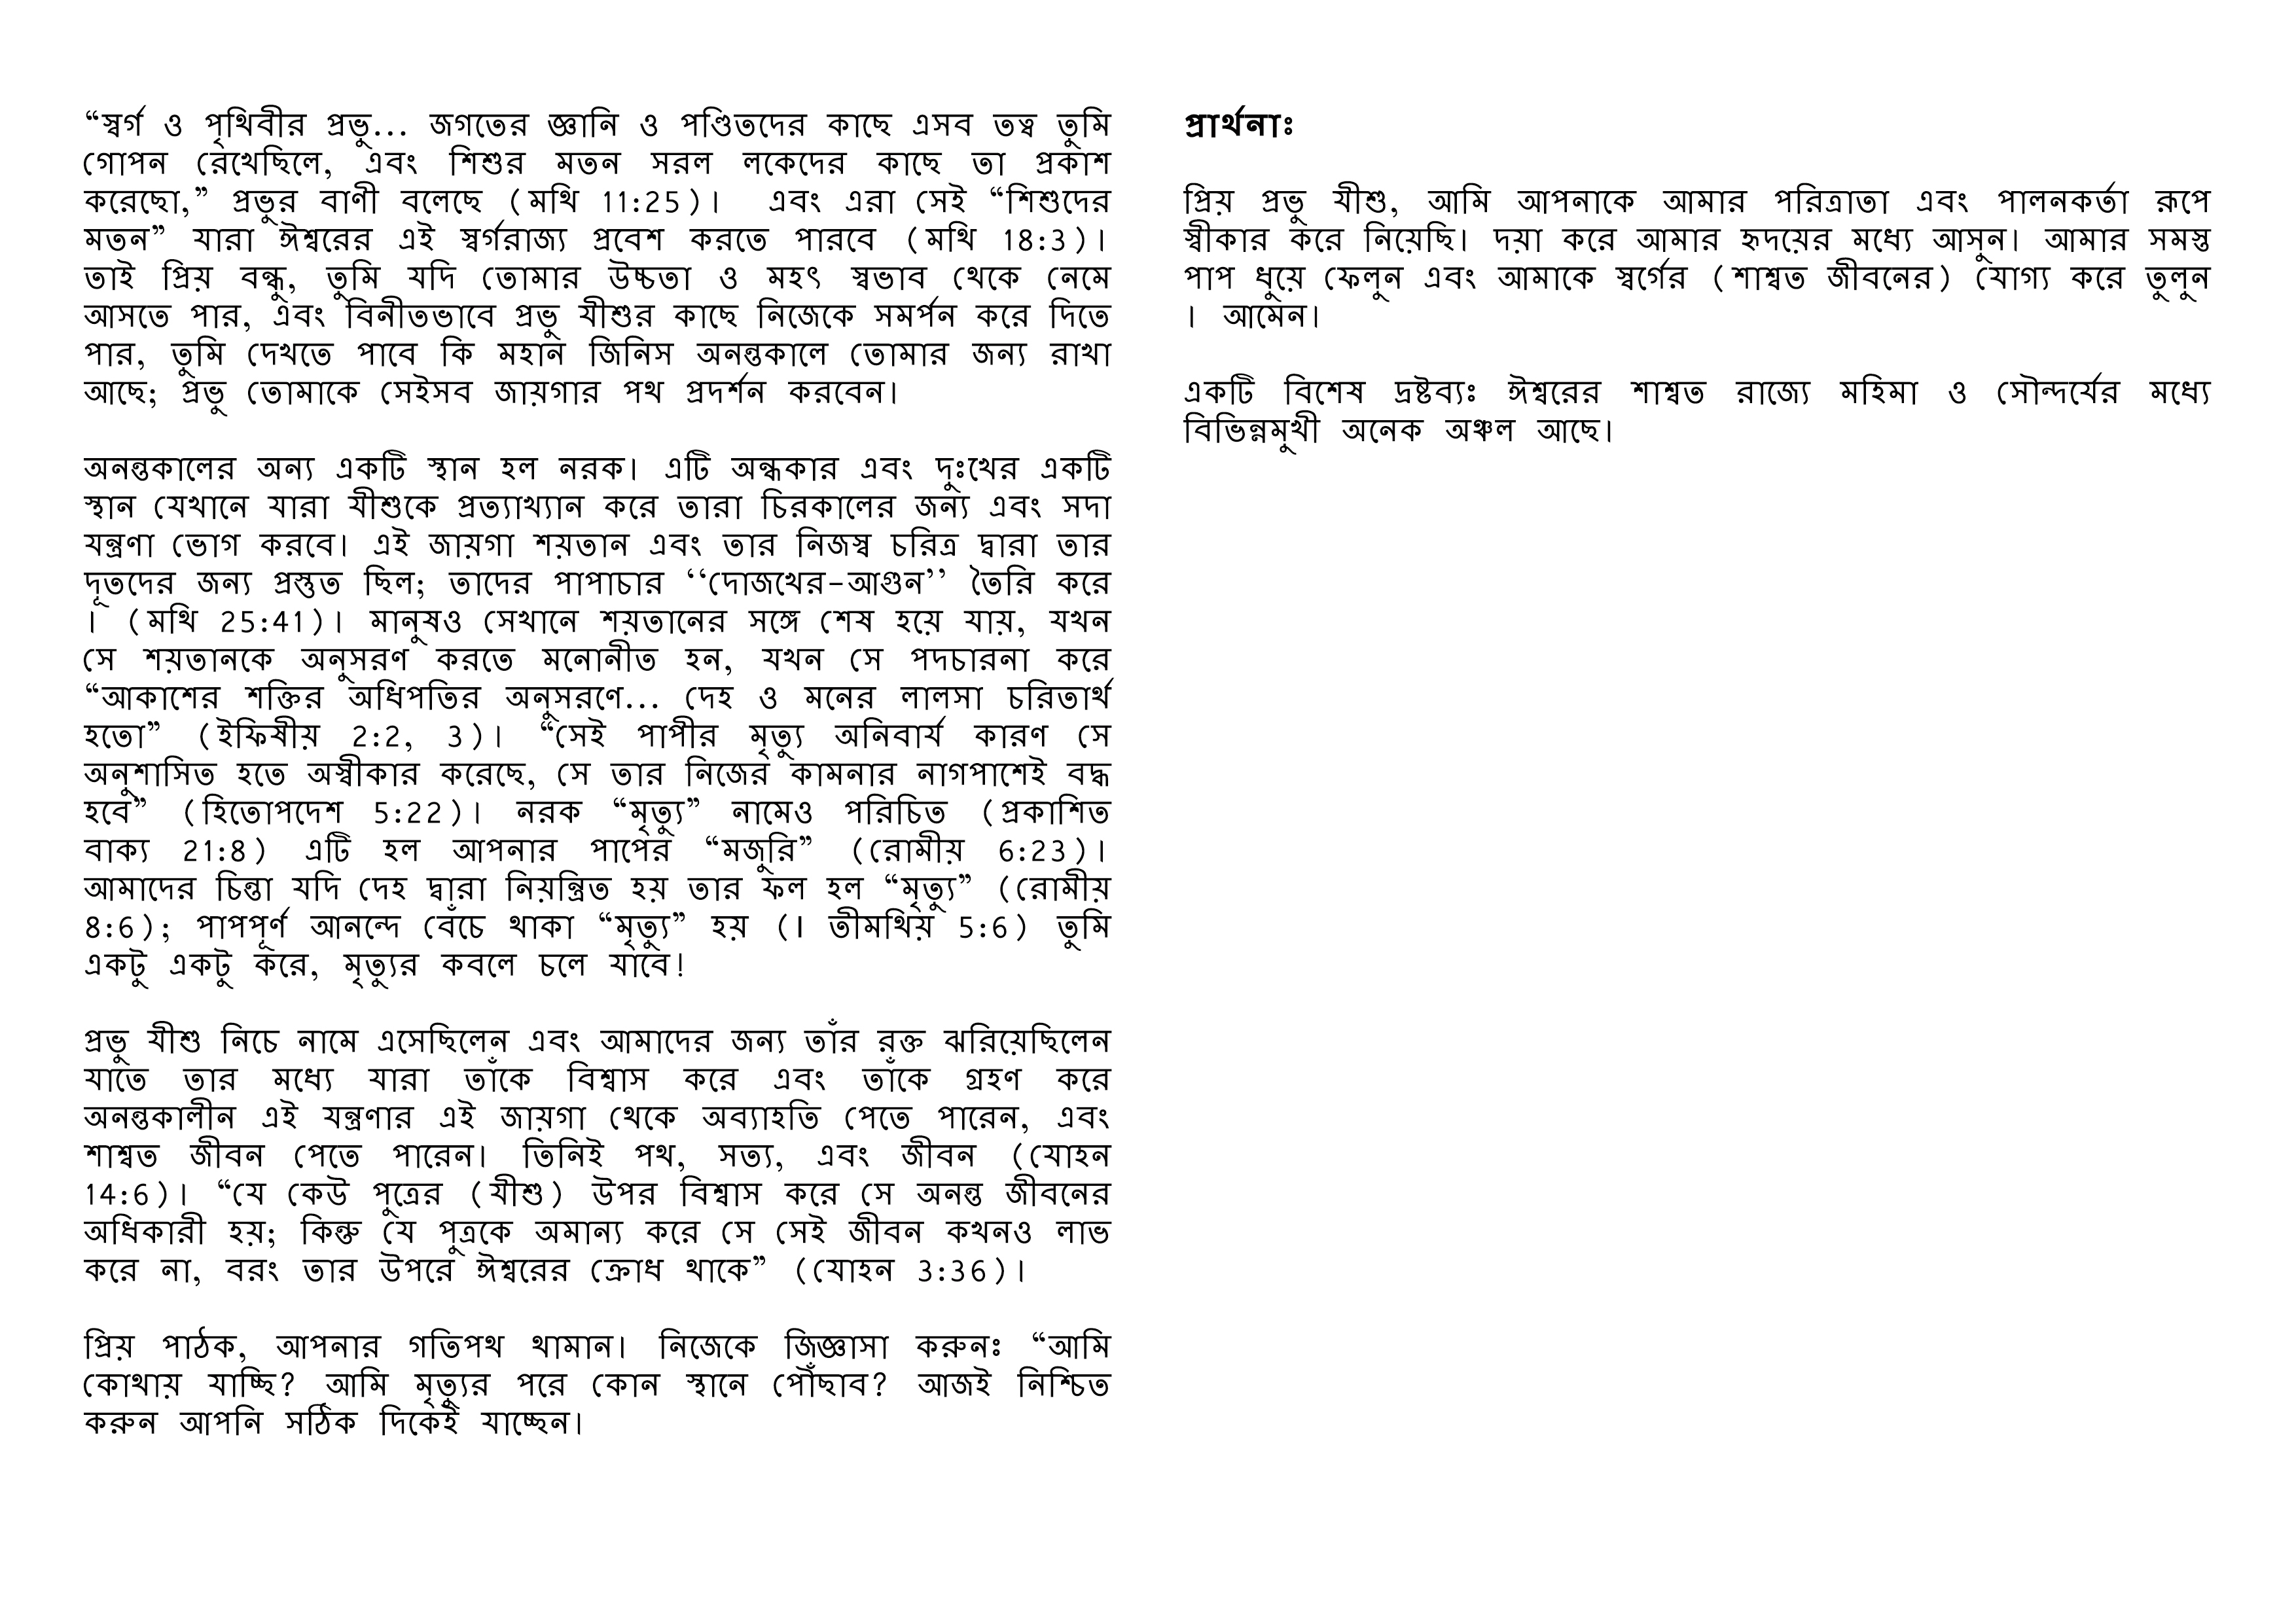 Where-will-you-spend-your-eternity-bengali-page-21